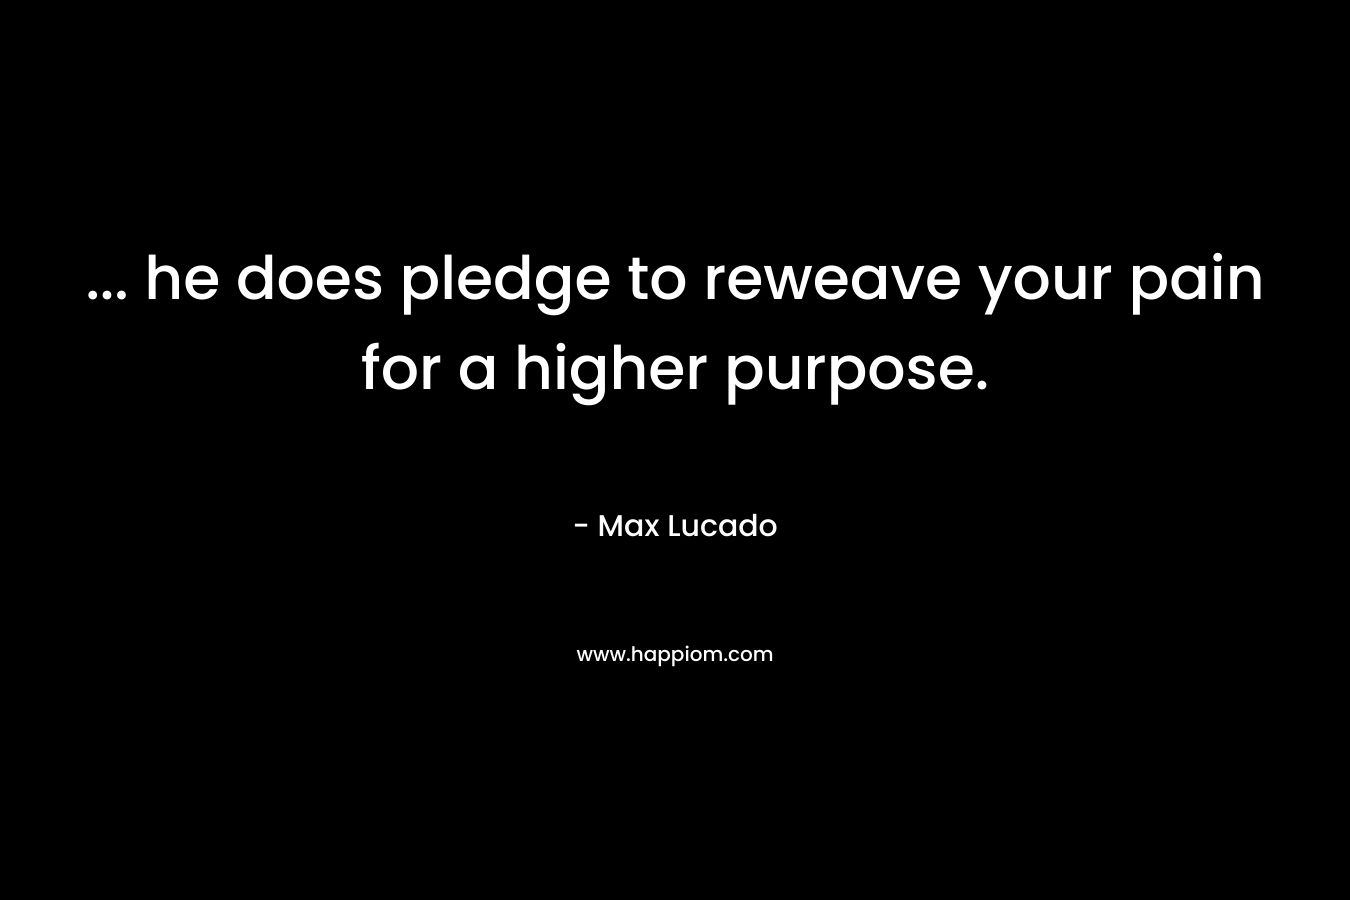 ... he does pledge to reweave your pain for a higher purpose.